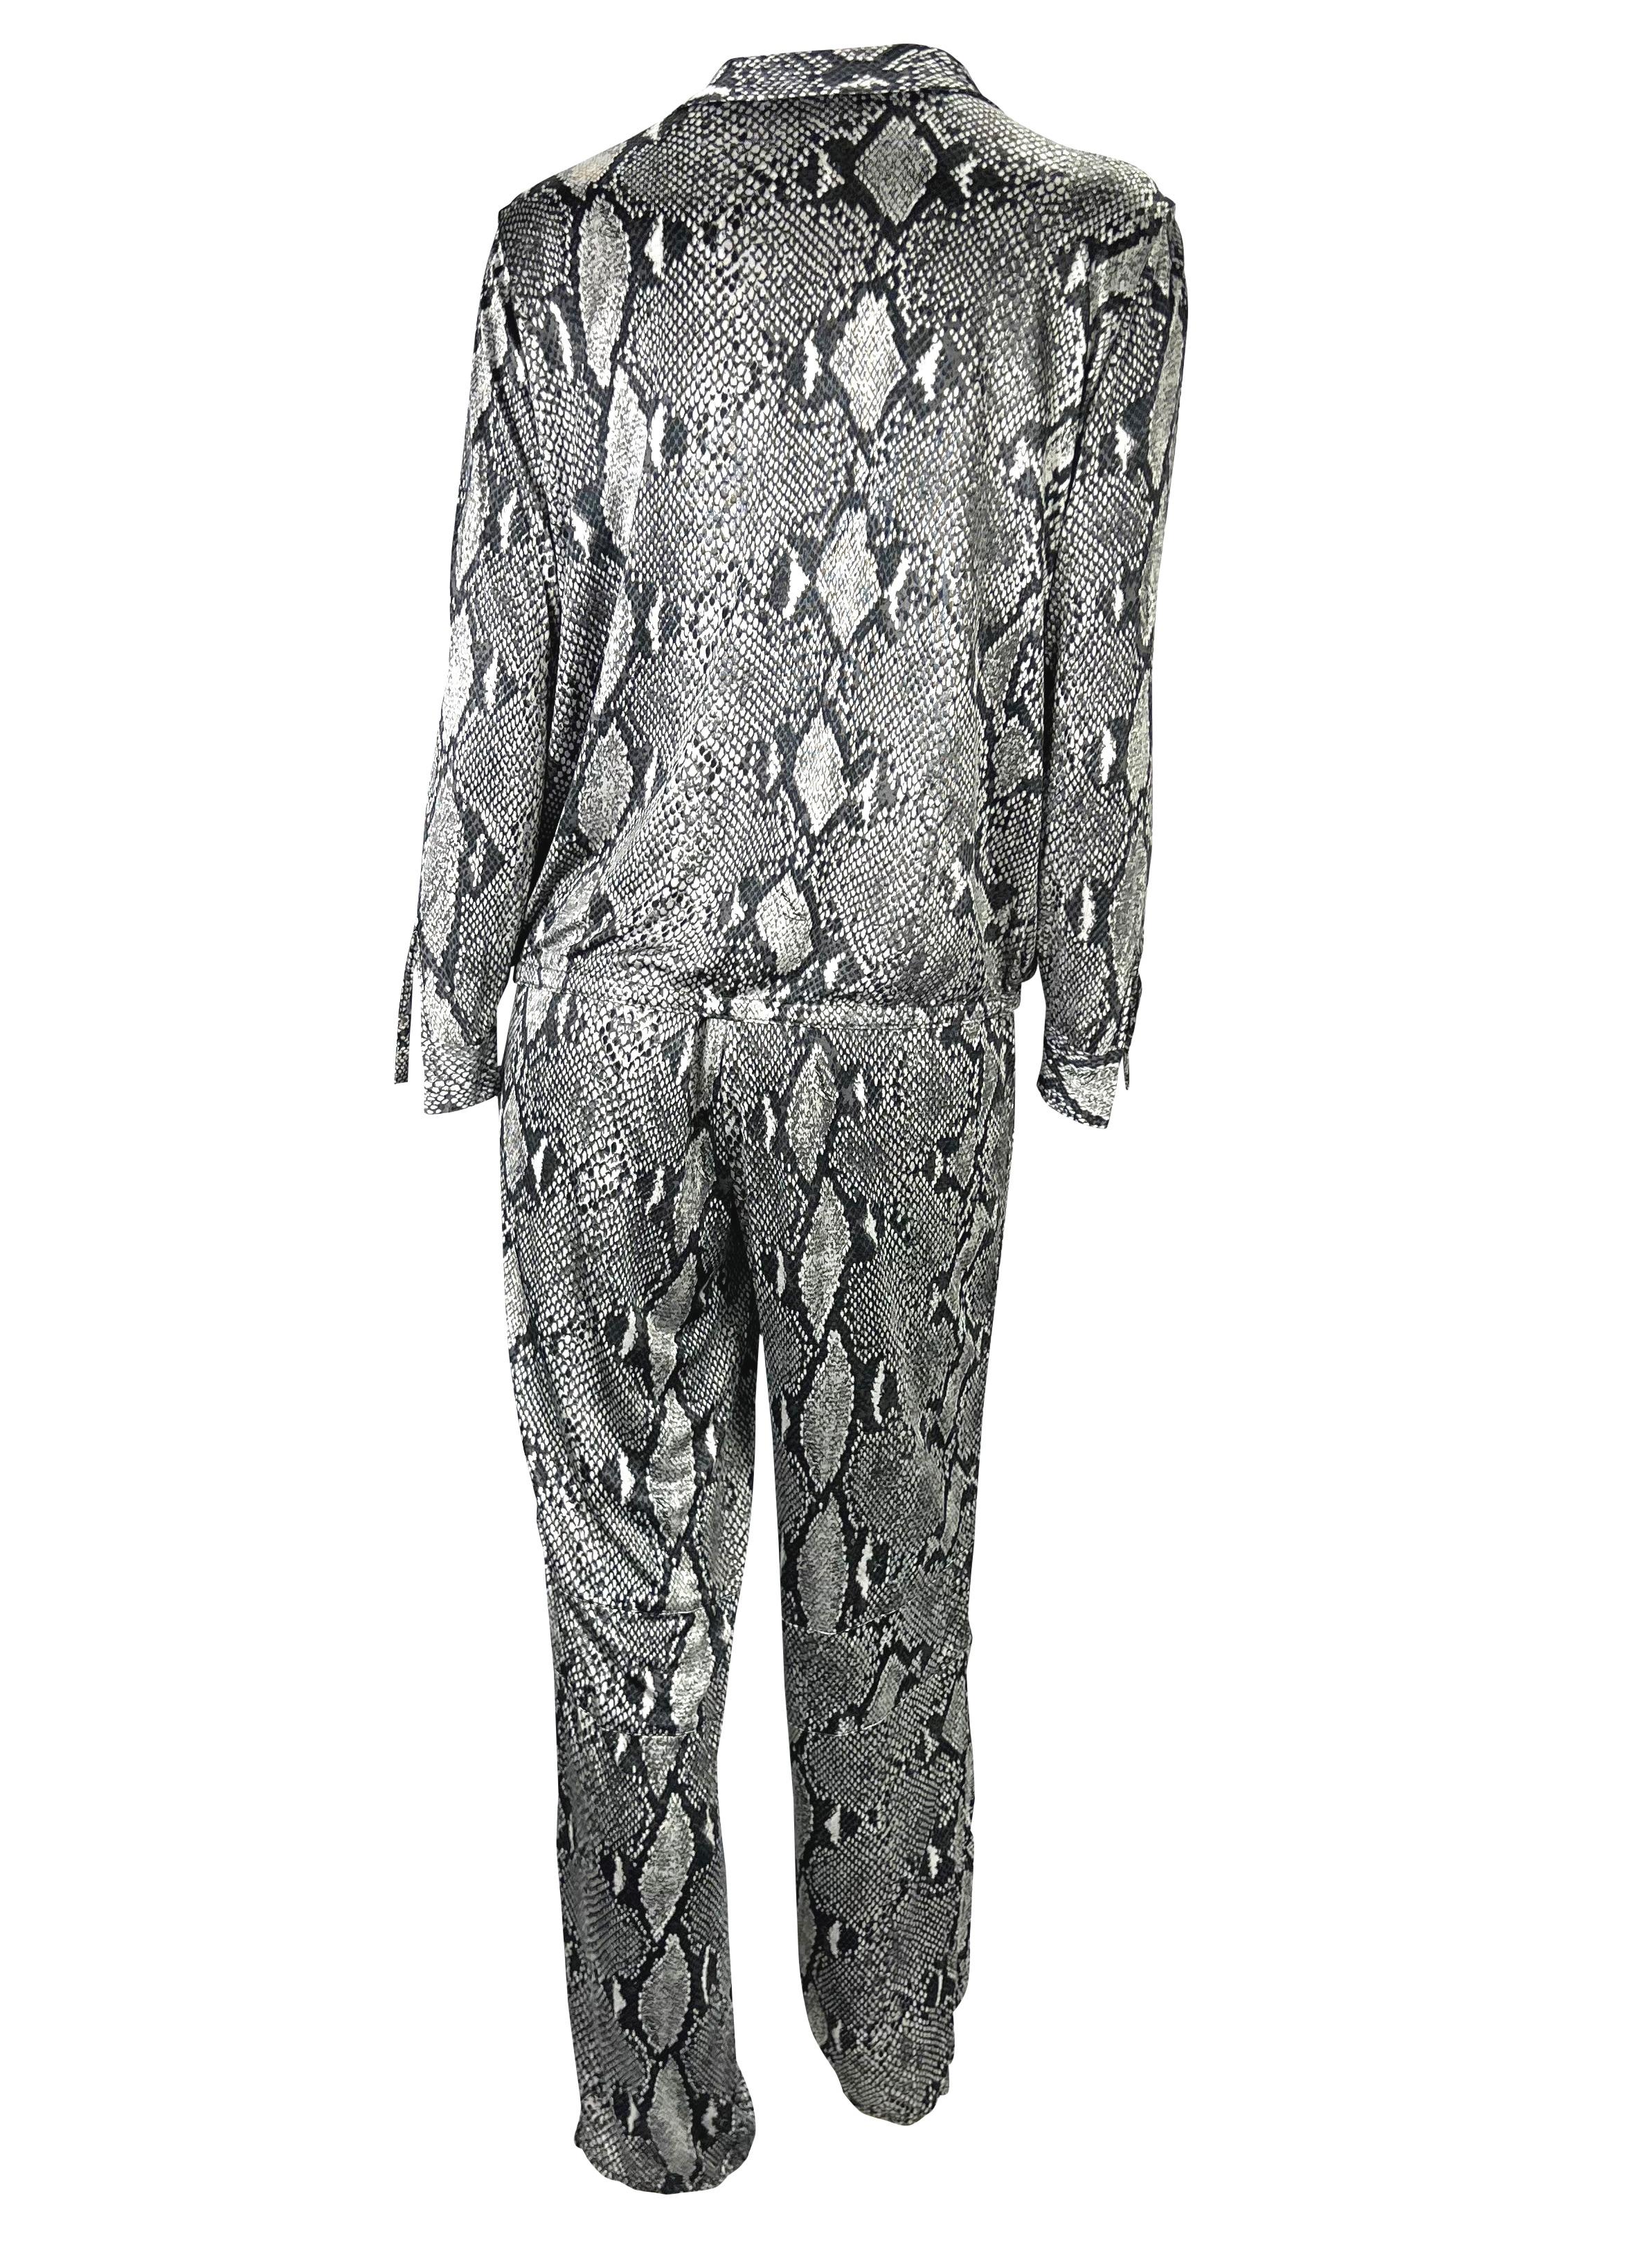 S/S 2000 Gucci by Tom Ford Black White Snakeskin Logo Print Viscose Pant Set For Sale 3